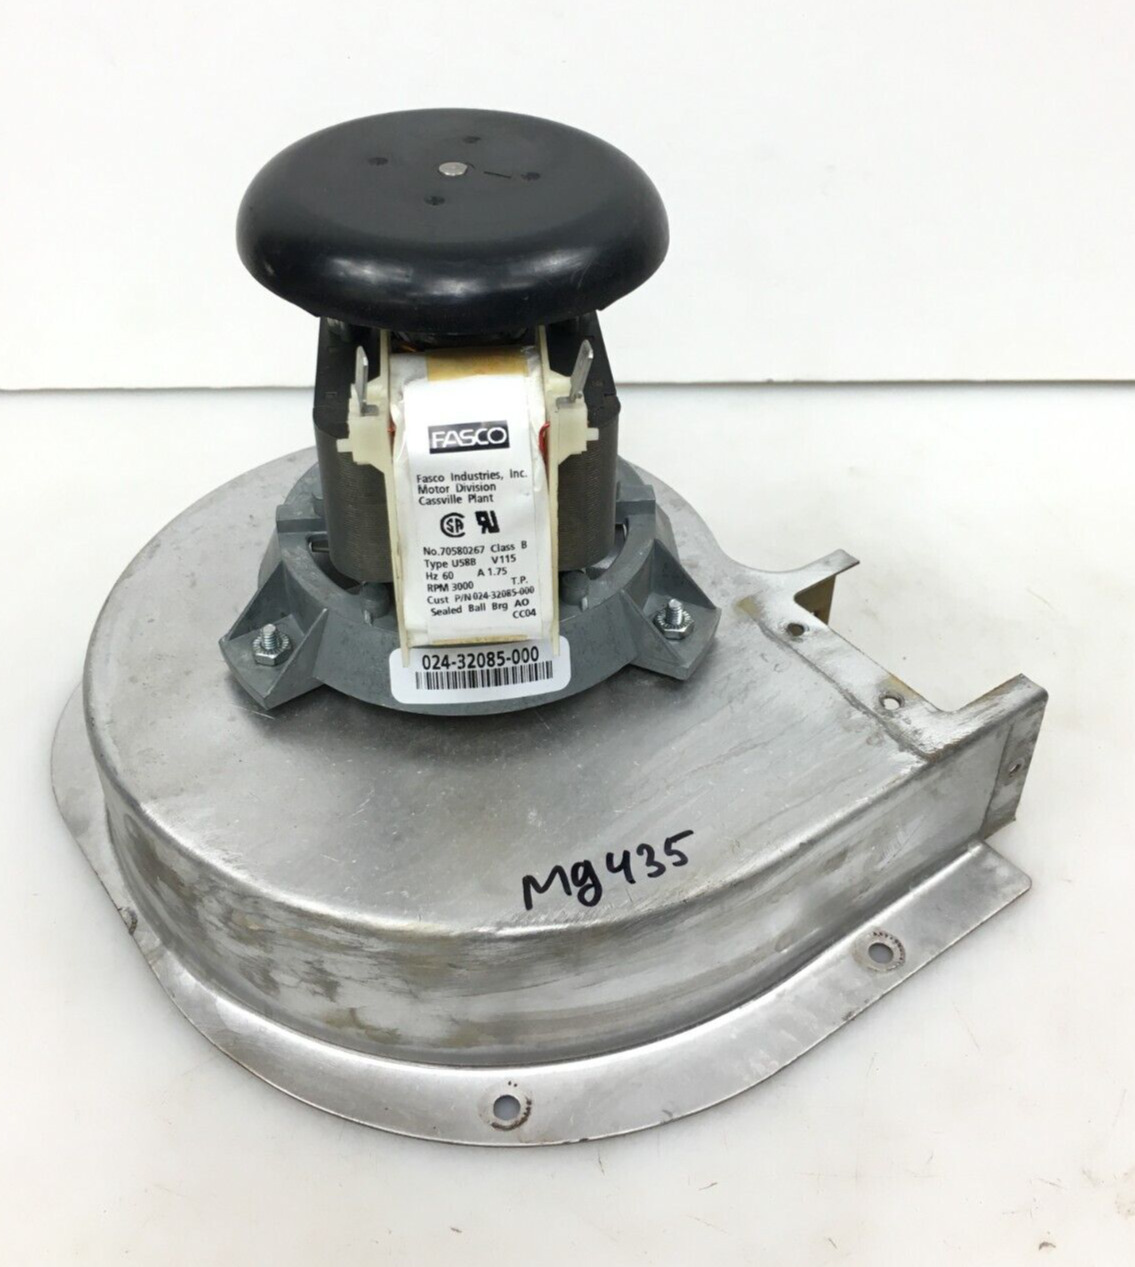 FASCO 7058-0267 Draft Inducer Blower Motor Assembly 024-32085-000 used #MG435